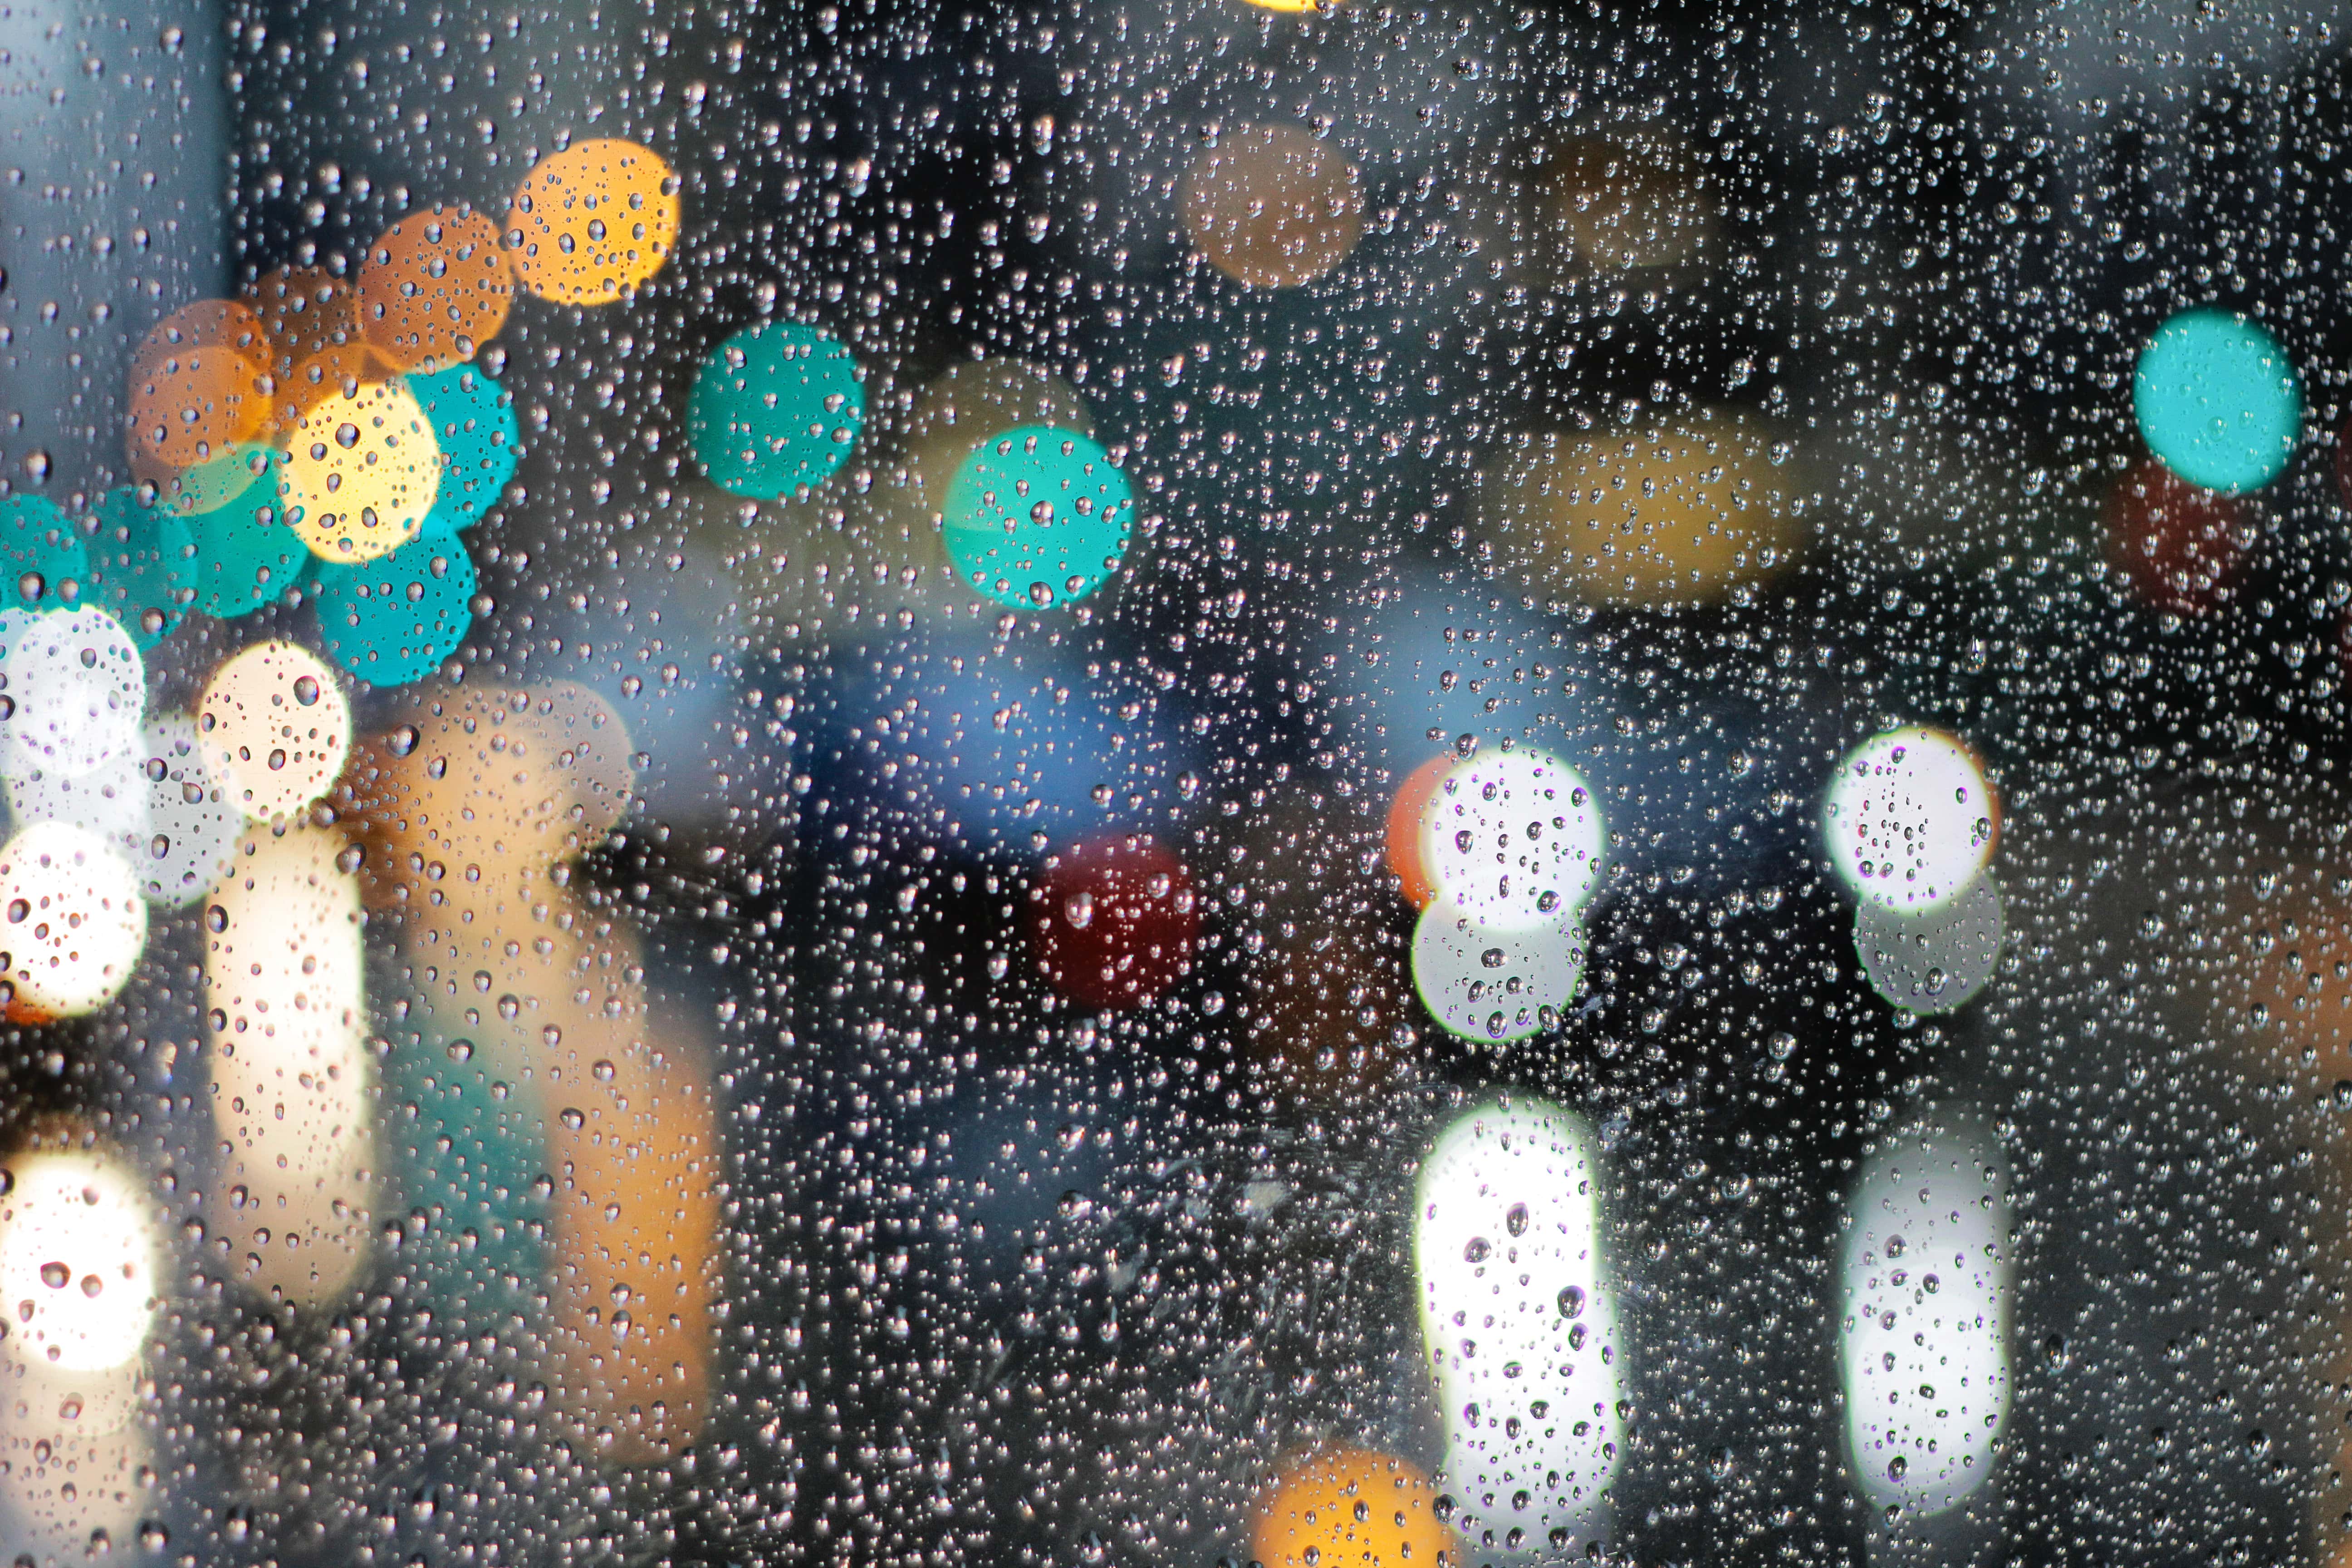 city lights reflected in raindrops on window